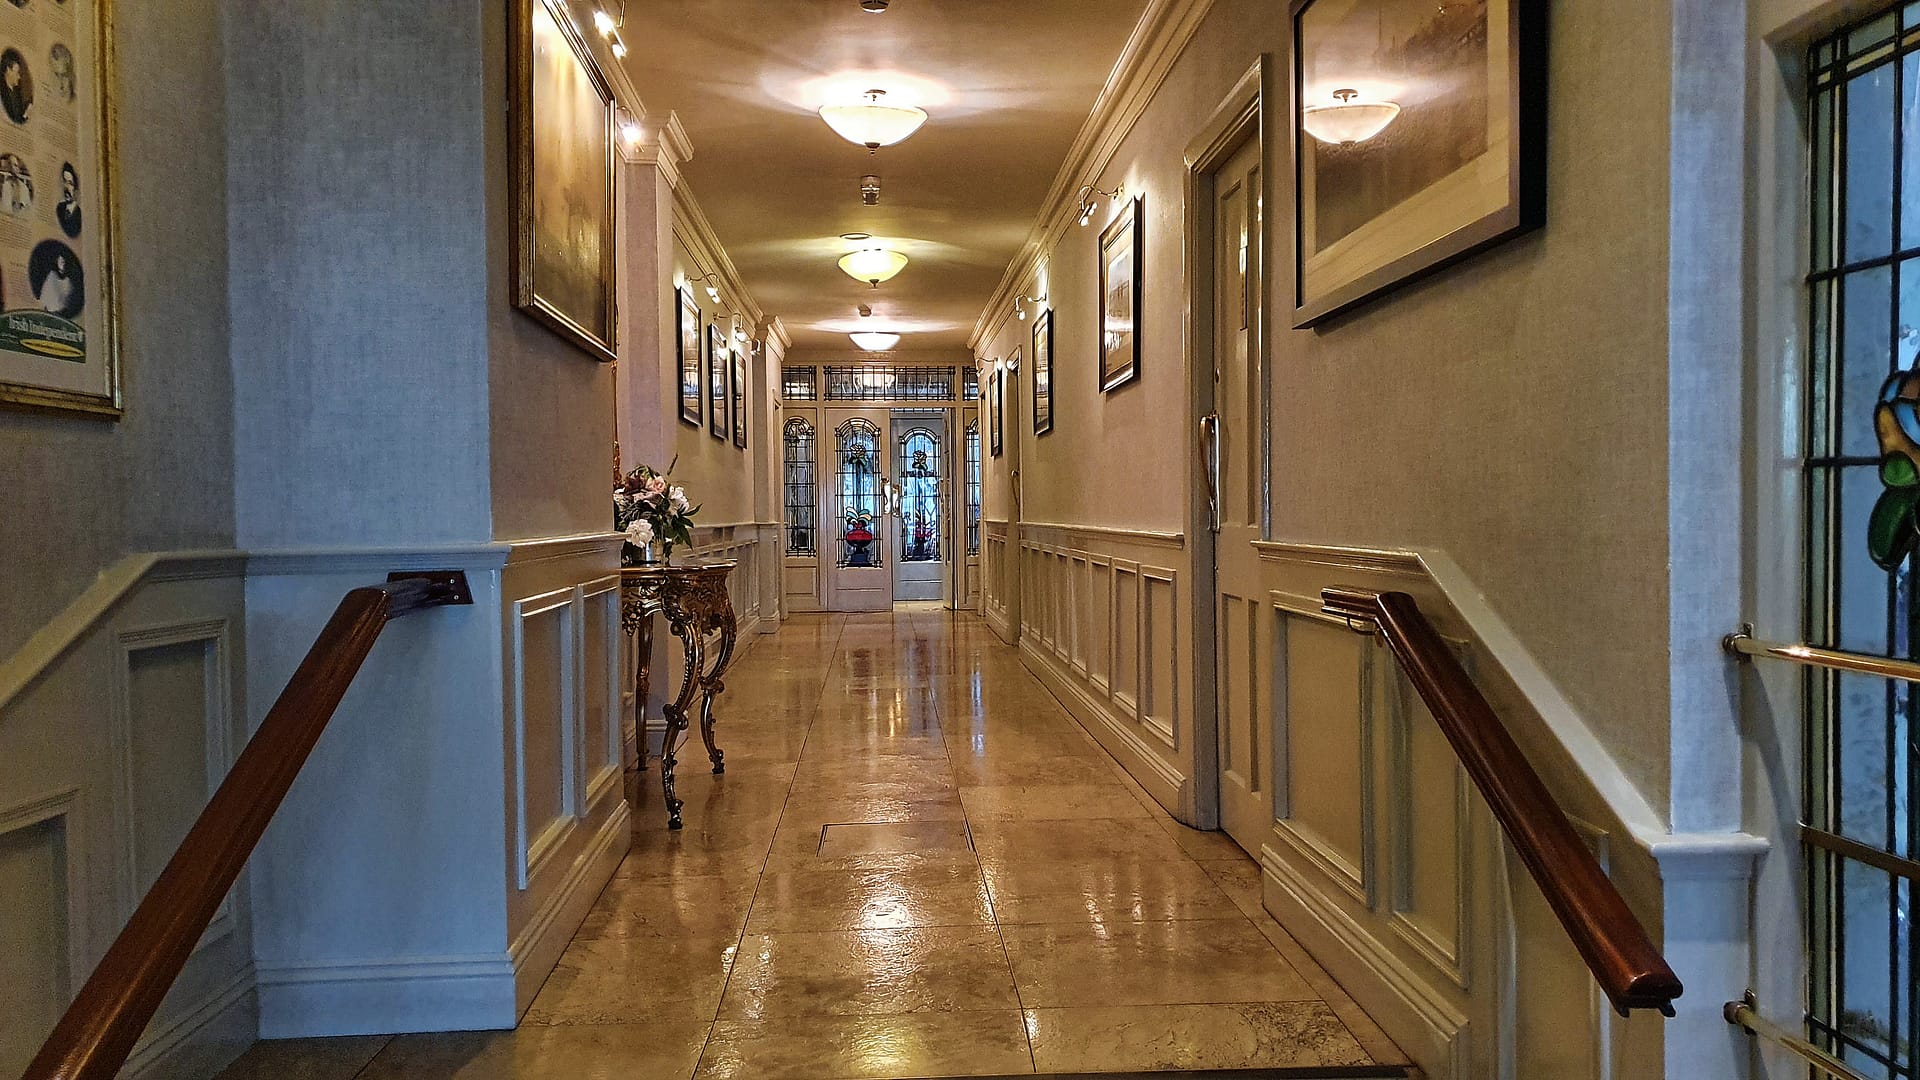 A hallway in the Granville Hotel, Waterford